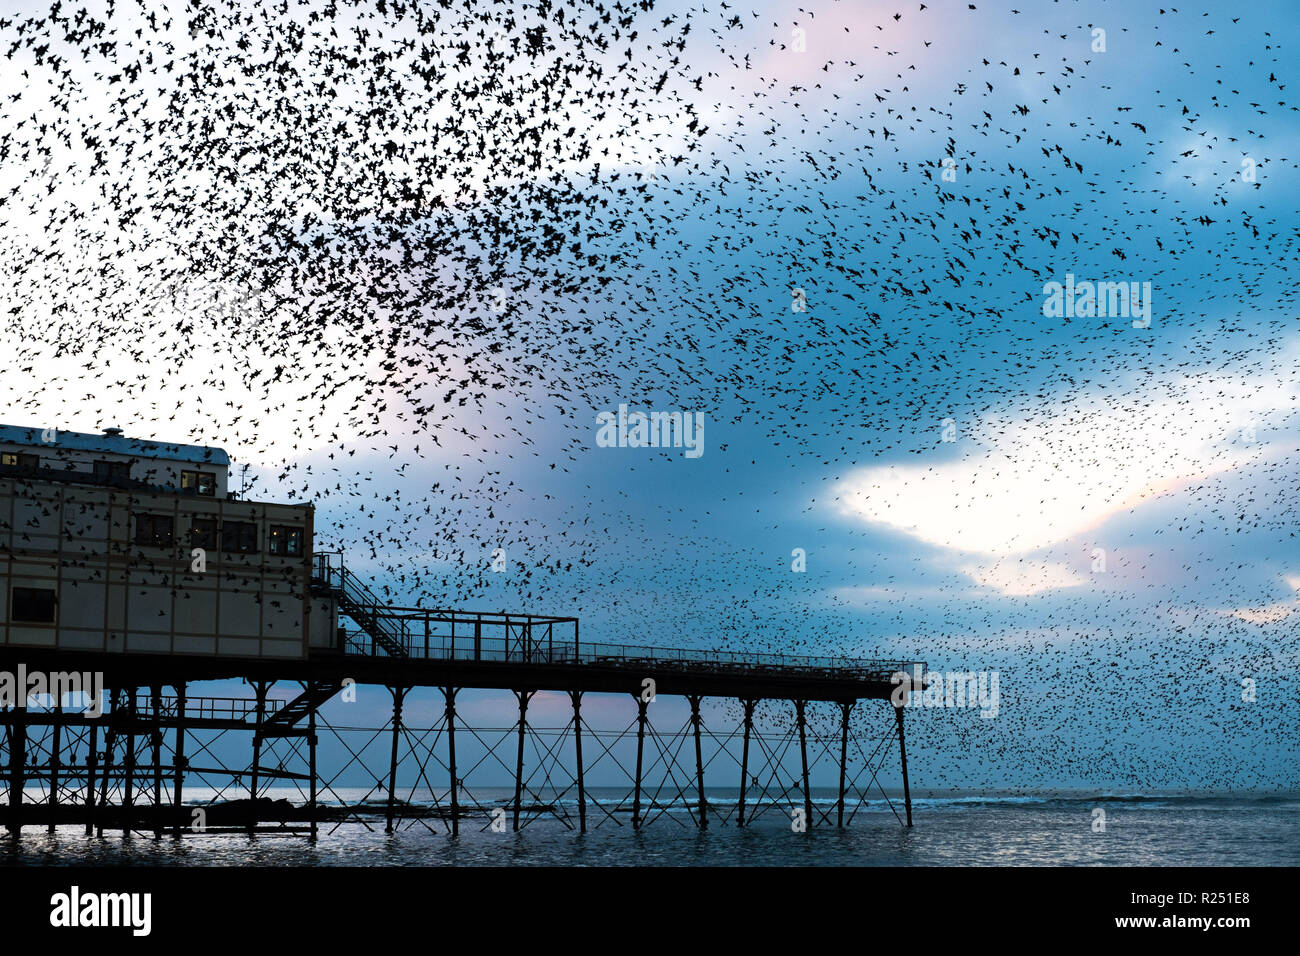 Aberystwyth Wales UK, 16th Nov 2018.  UK Weather: Tens  of thousands of starlings fill the sky as they perform their nightly balletic ‘murmurations’ before swooping down to roost noisily for the night on the forest  of cast iron legs underneath the Aberystwyth’s Victorian seaside pier. Aberystwyth is one of the few urban roosts in the country and draws people from all over the UK to witness the spectacular nightly displays.  photo credit: Keith Morris / Alamy Live News Stock Photo